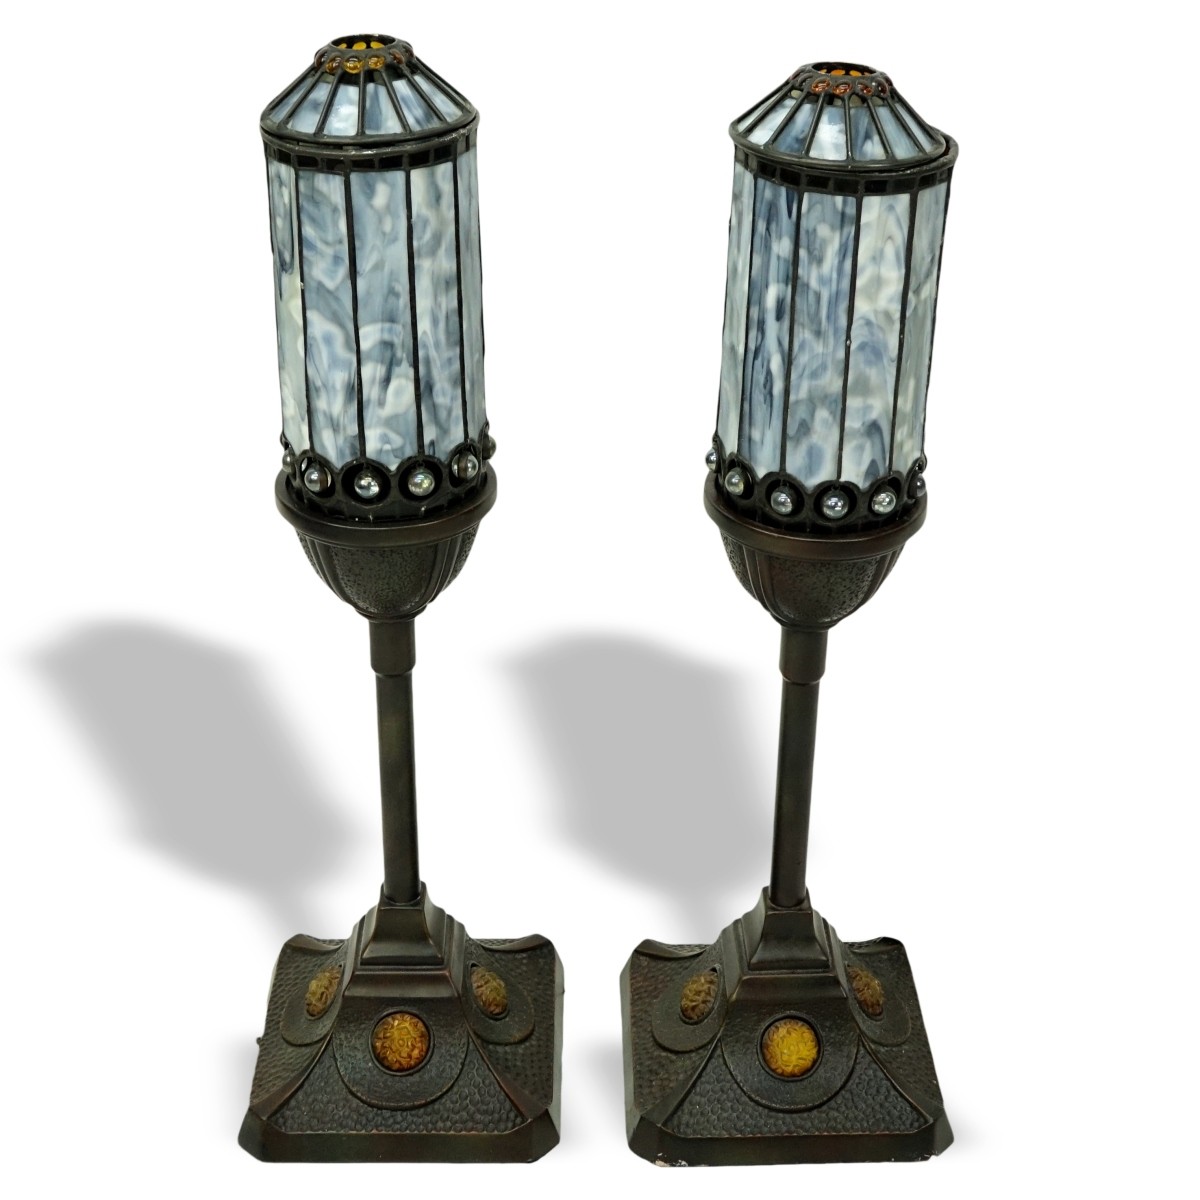 Pair Of Quoizel Inc Lamps With Leaded Glass Shades